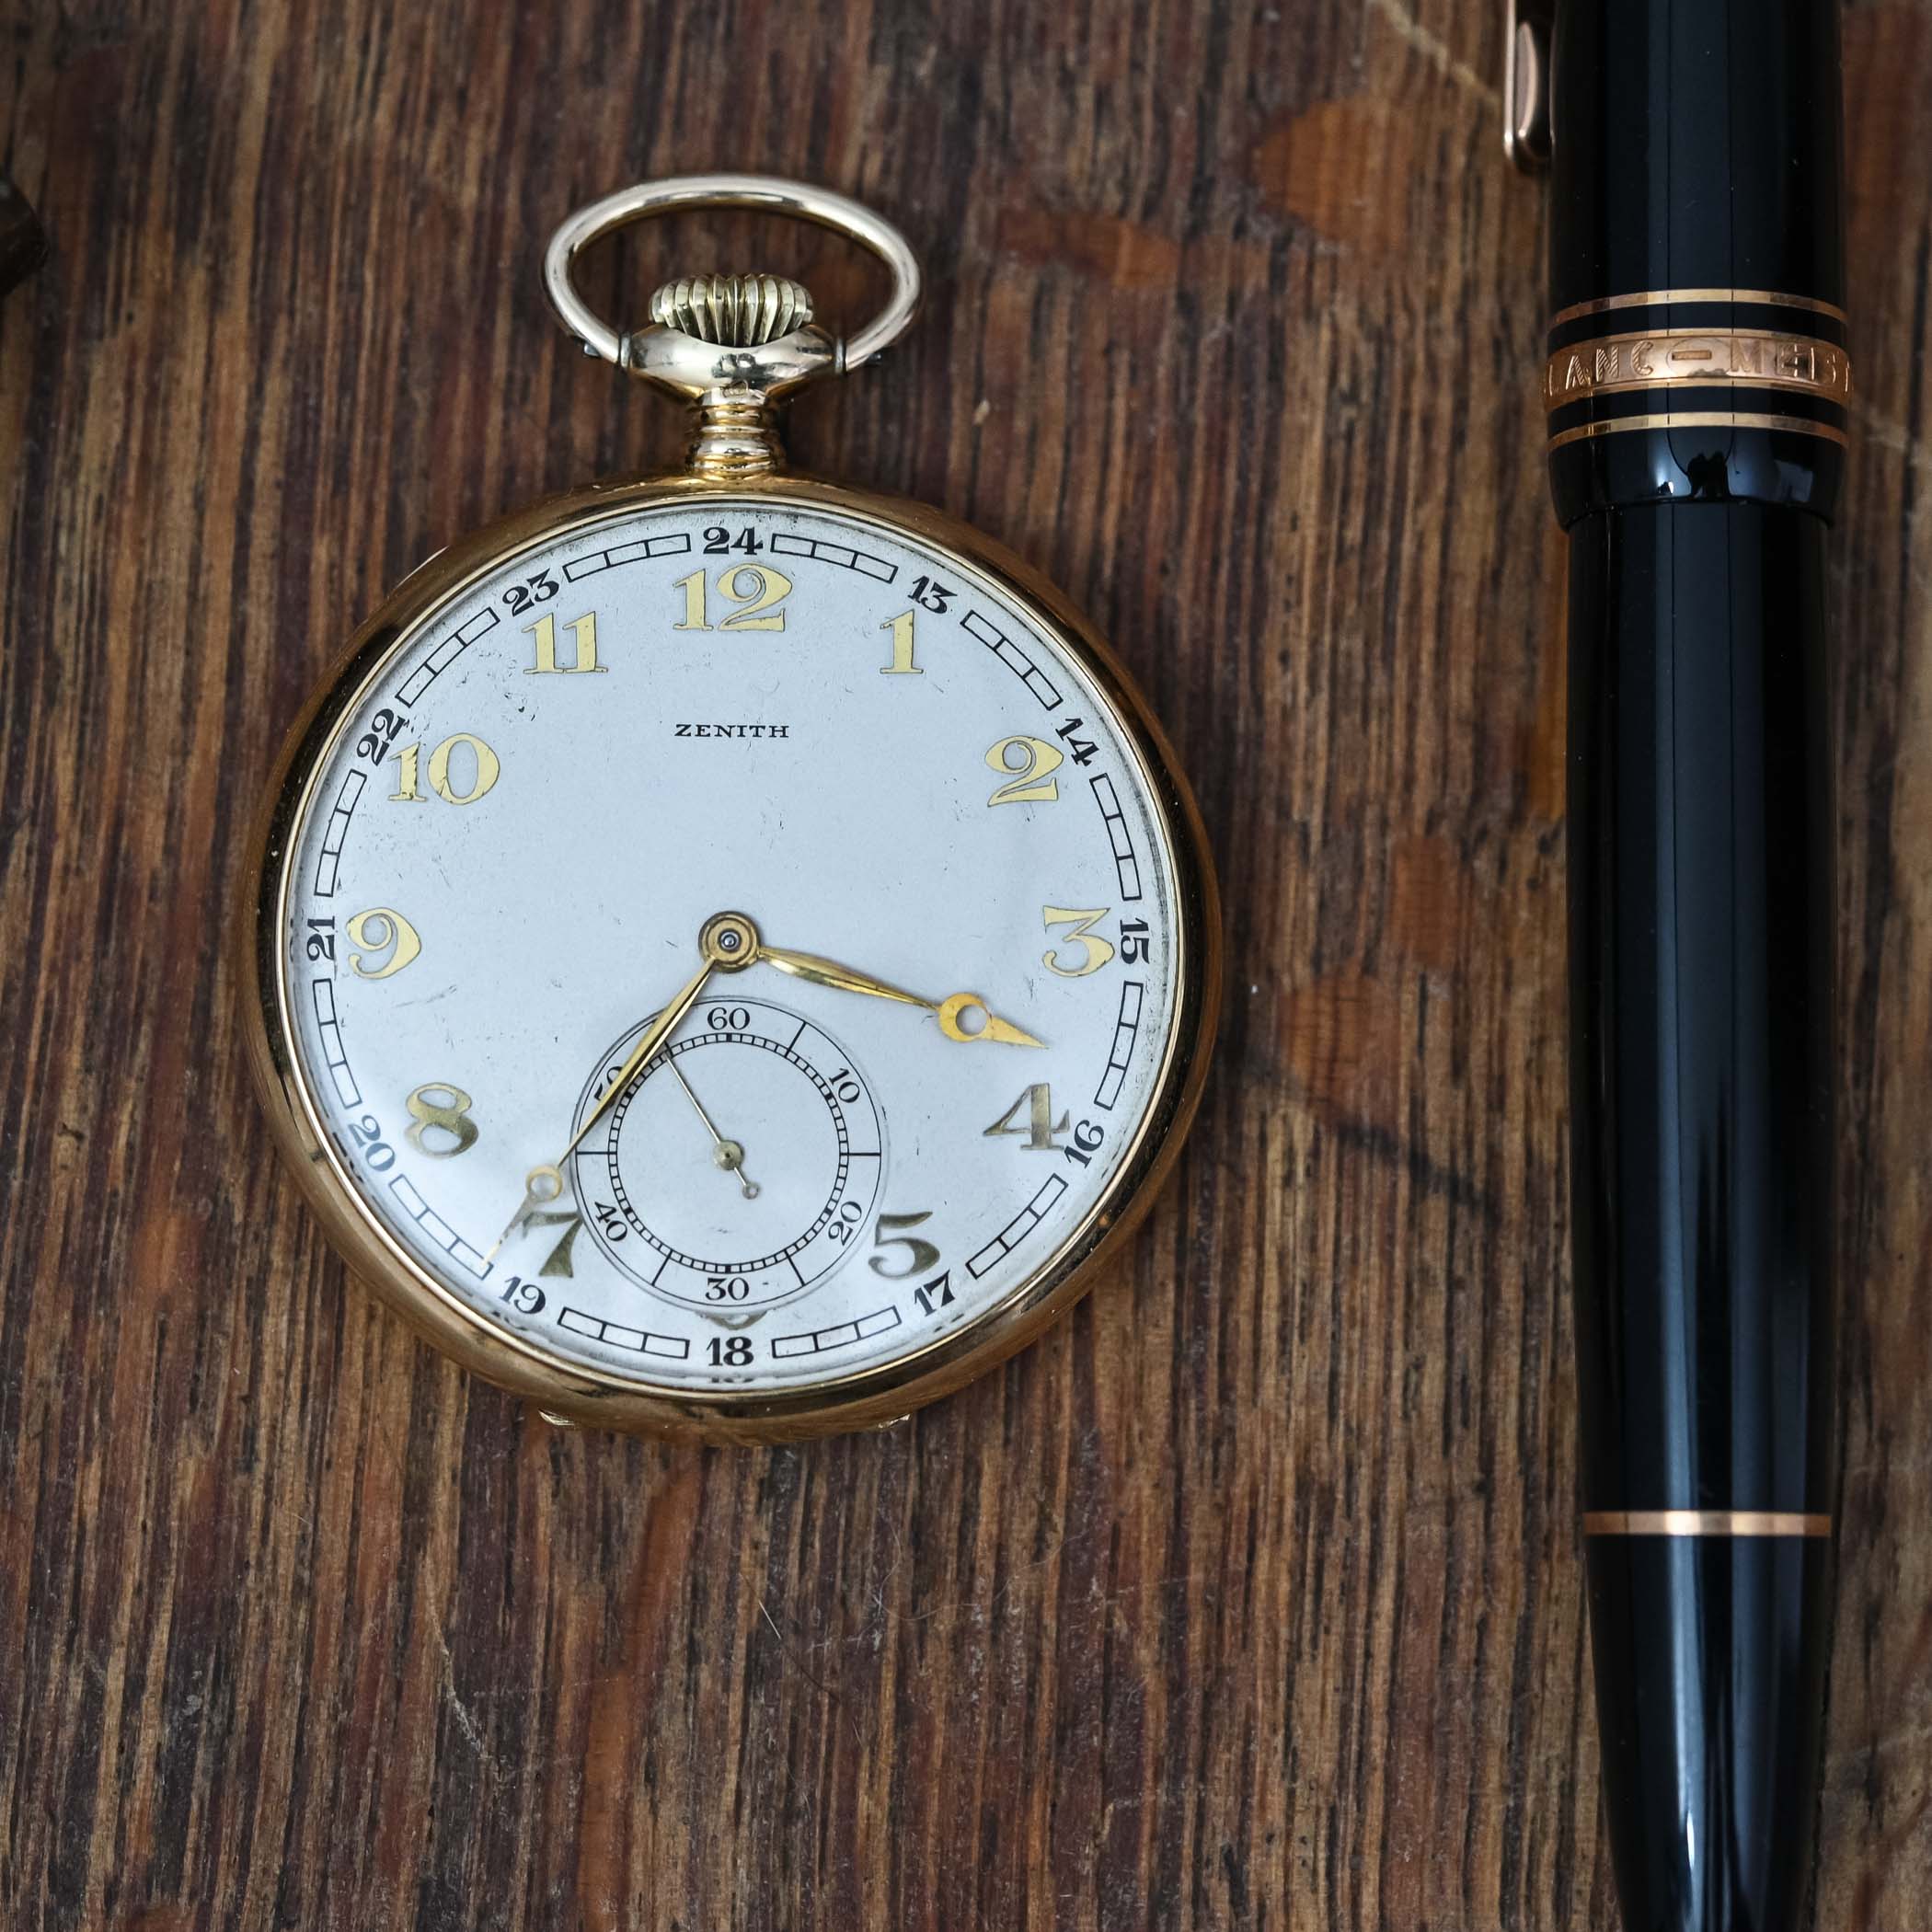 In-Depth - Is There Still a Place for Pocket Watches in the 21st